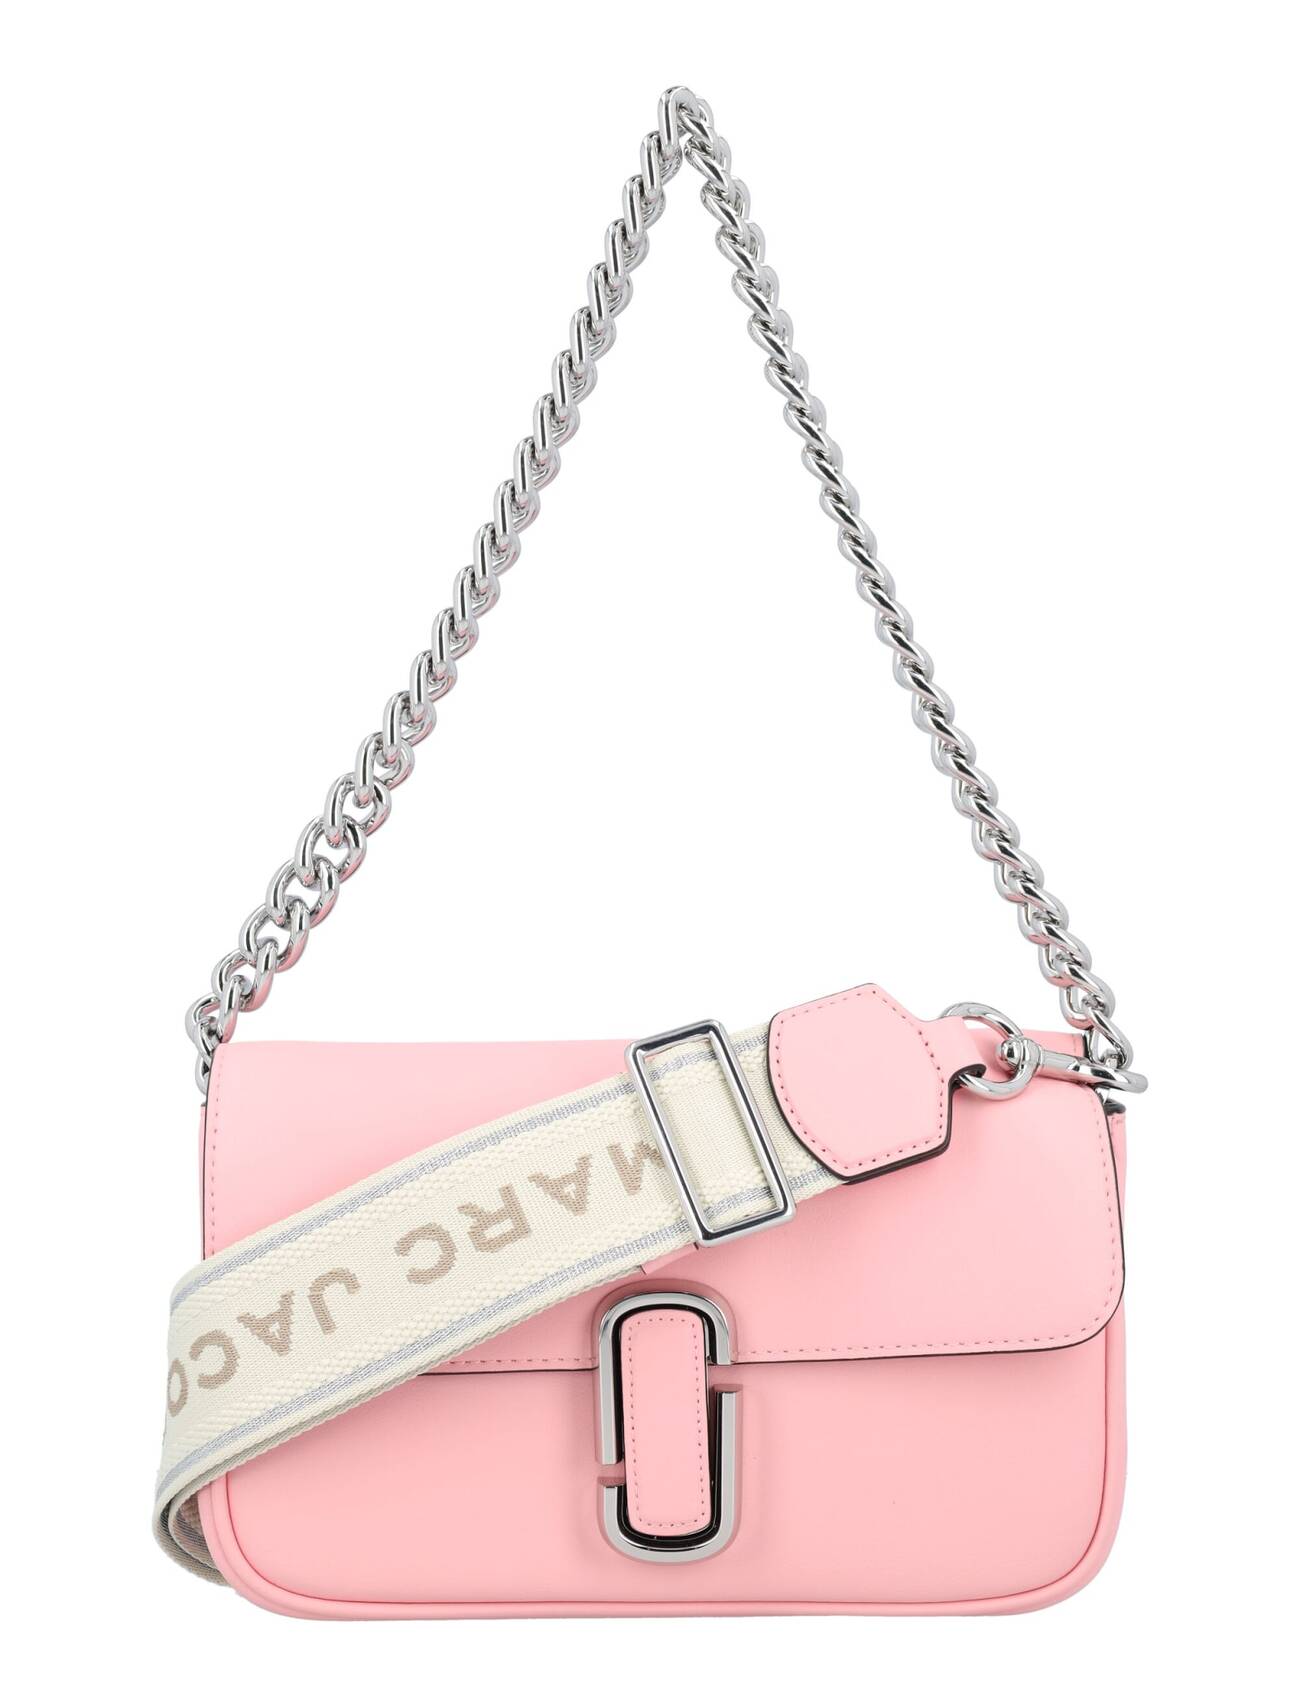 Marc Jacobs The J Bag in pink